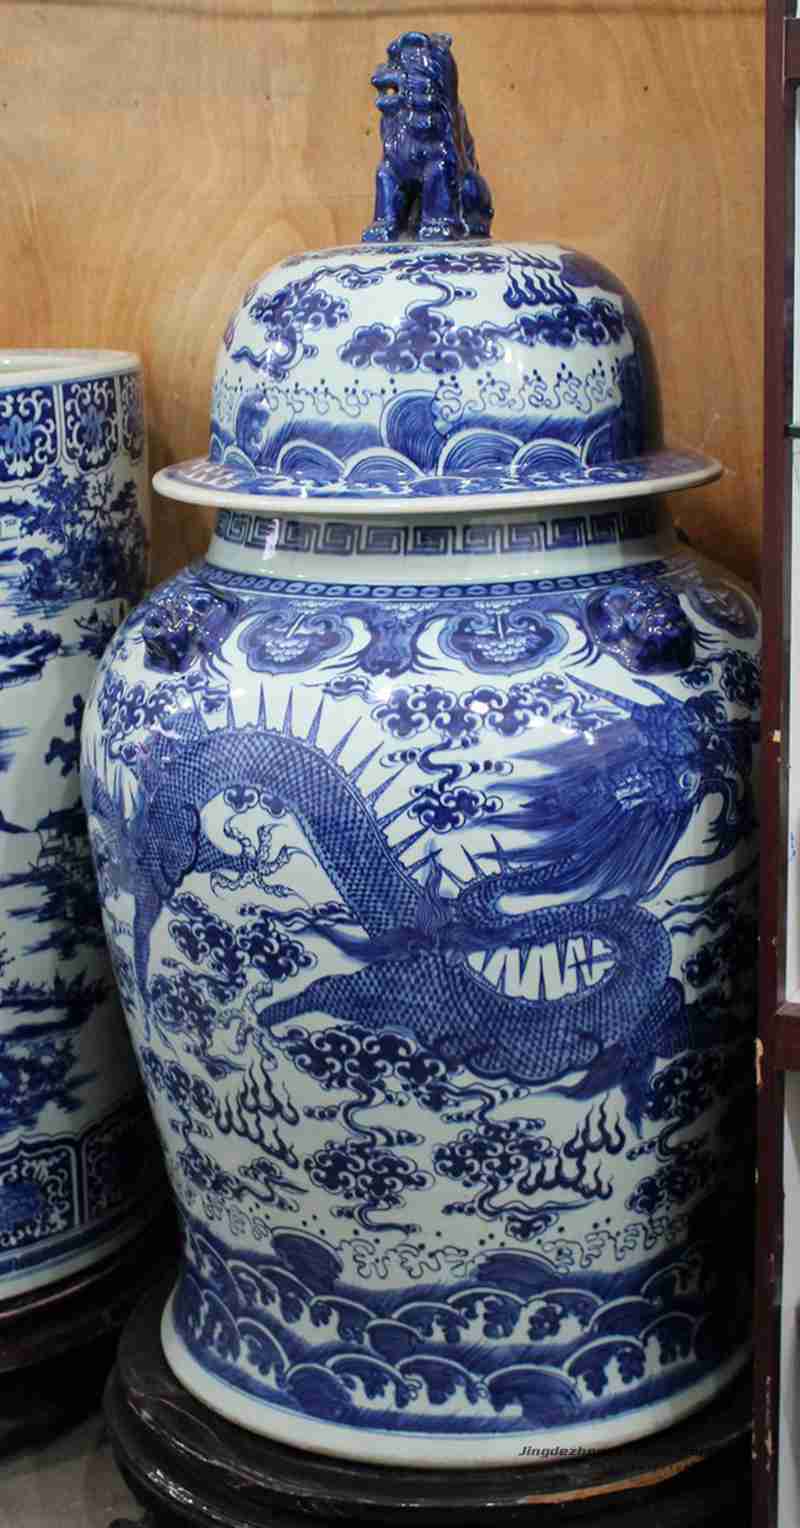 RYOM20_Big size hand paint blue and white Chinese dragon pattern interior decor porcelain jar